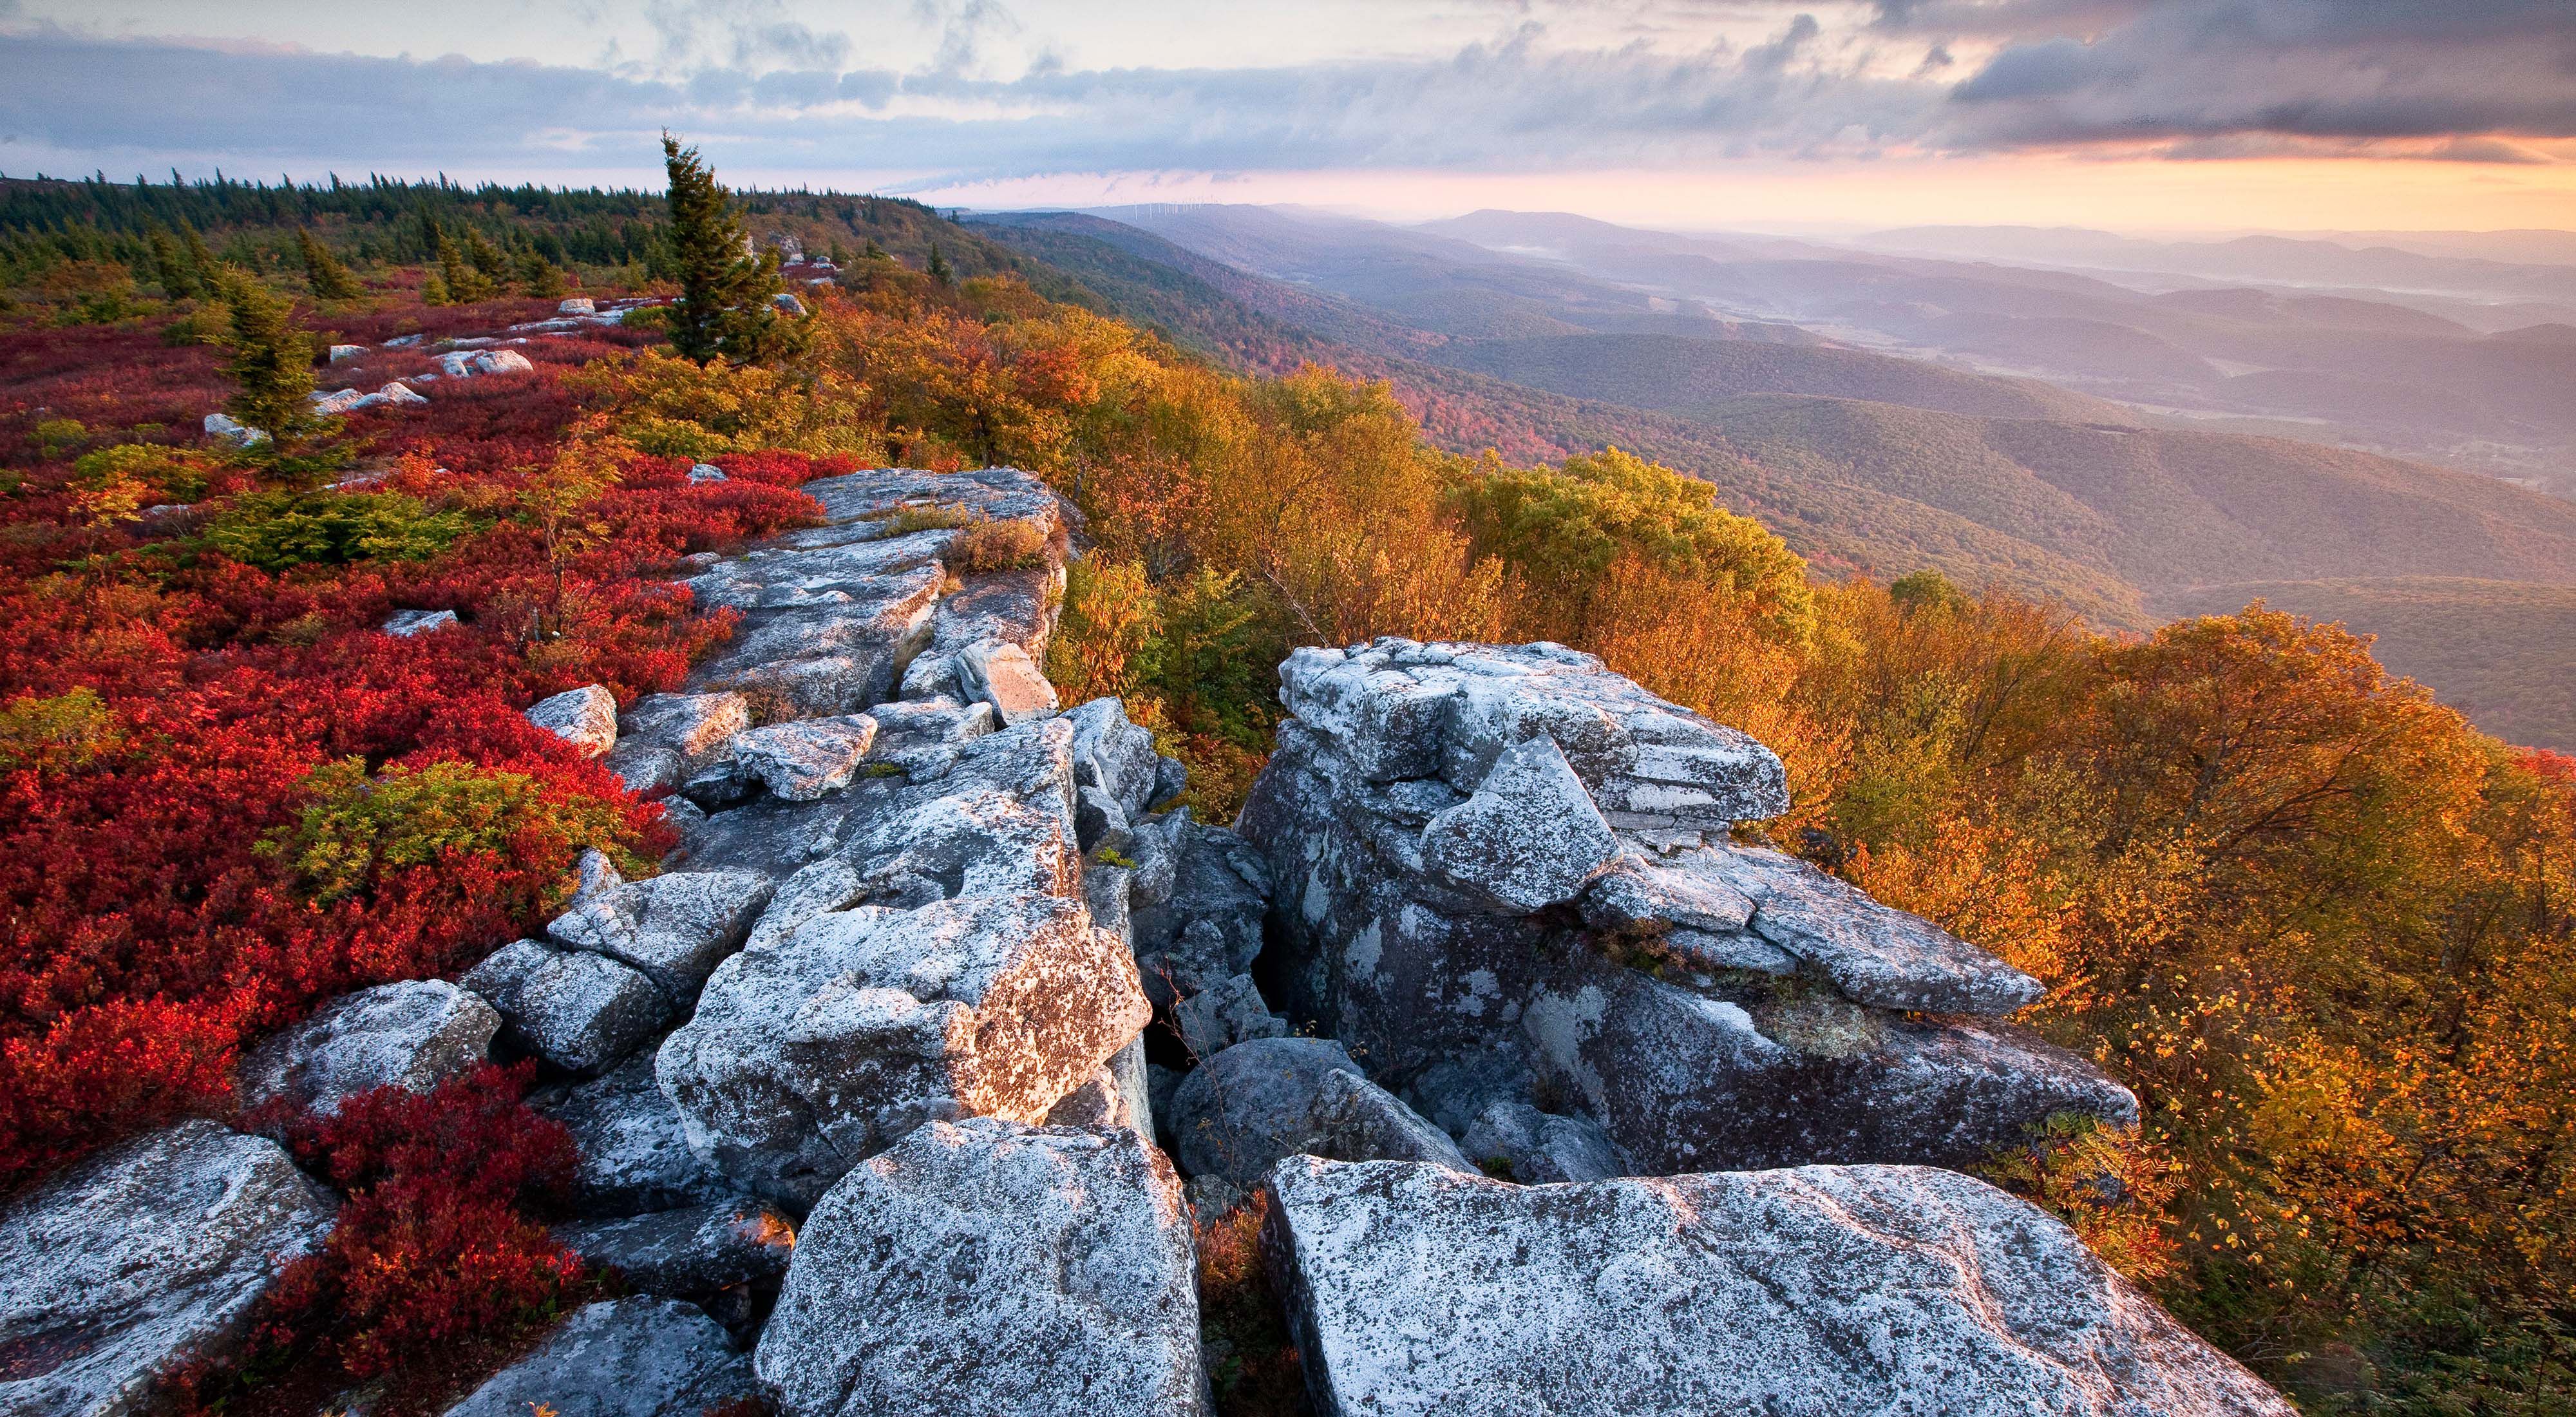 Fall color at The Nature Conservancy's Bear Rocks Preserve in West Virginia